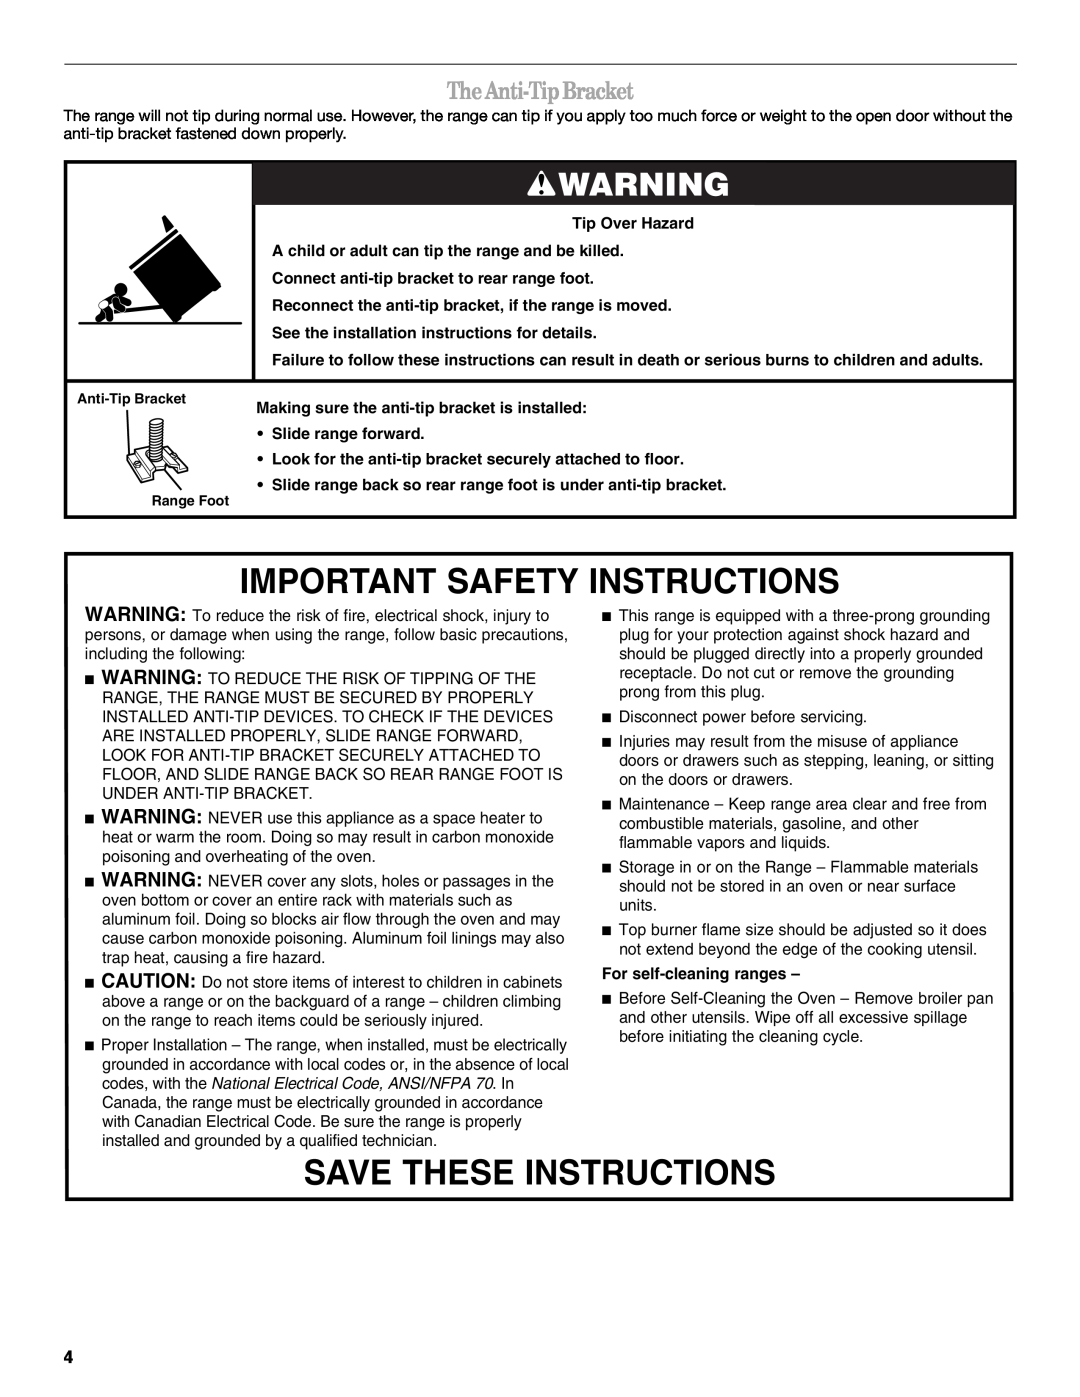 Whirlpool W10162212A TheAnti-TipBracket, Important Safety Instructions, Save These Instructions, For self-cleaning ranges 